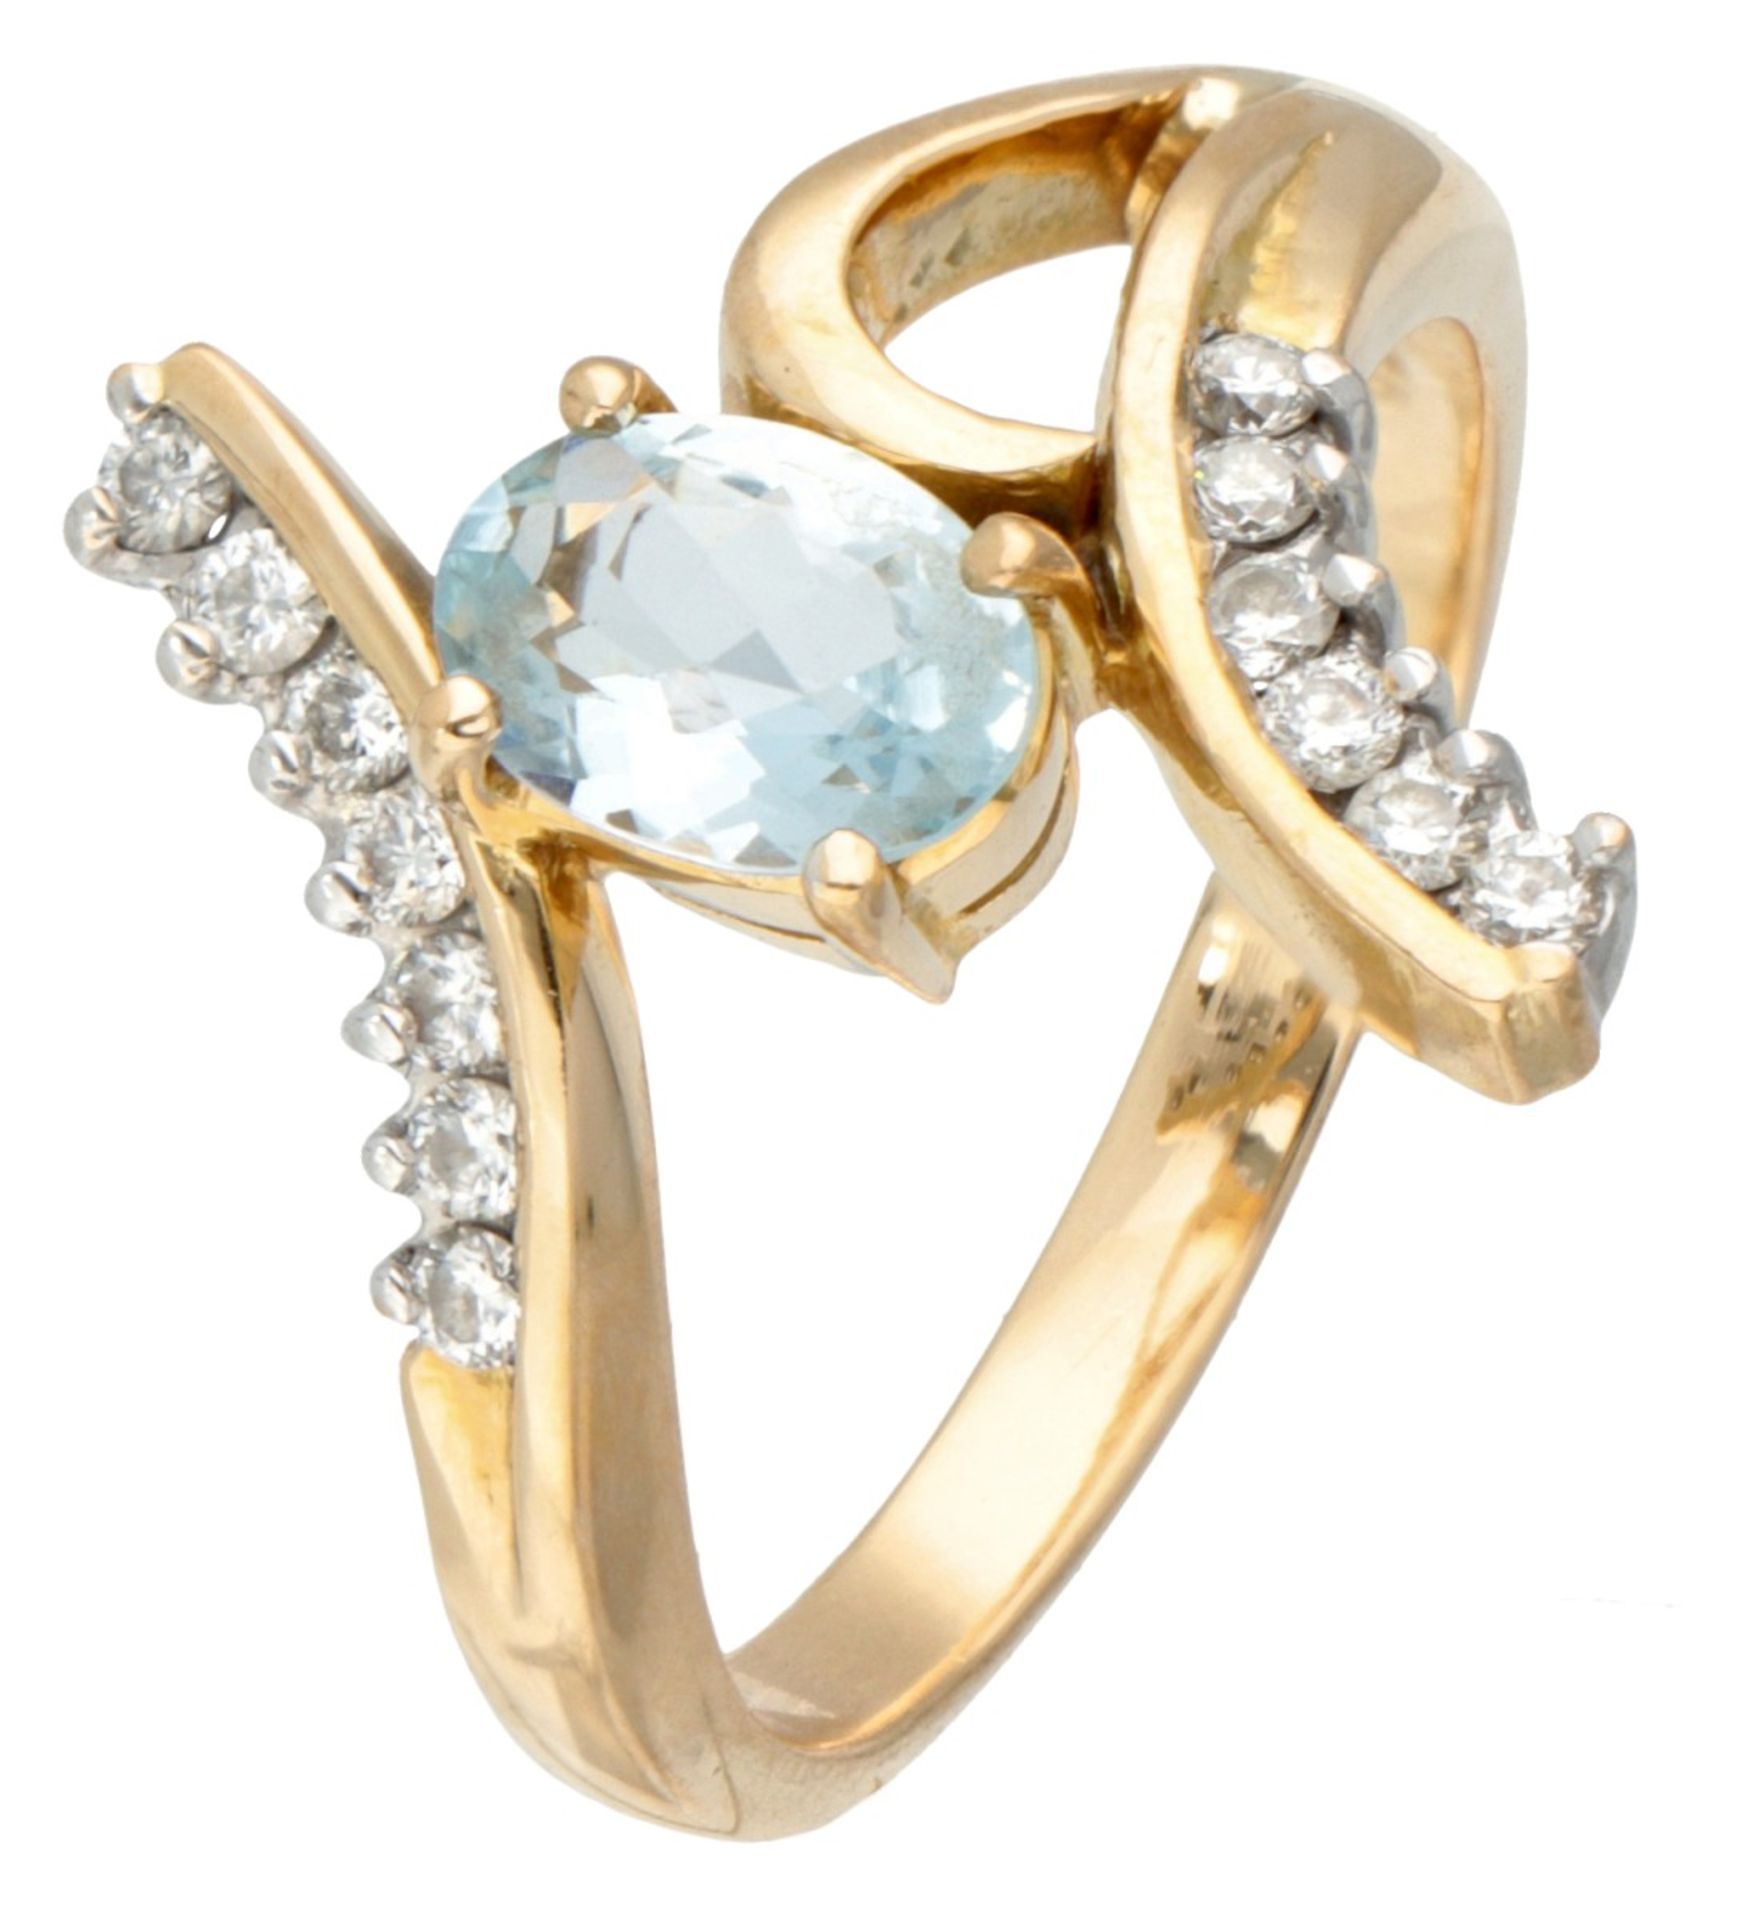 18K. Yellow gold ring set with approx. 0.55 ct. aquamarine and approx. 0.13 ct. diamond.